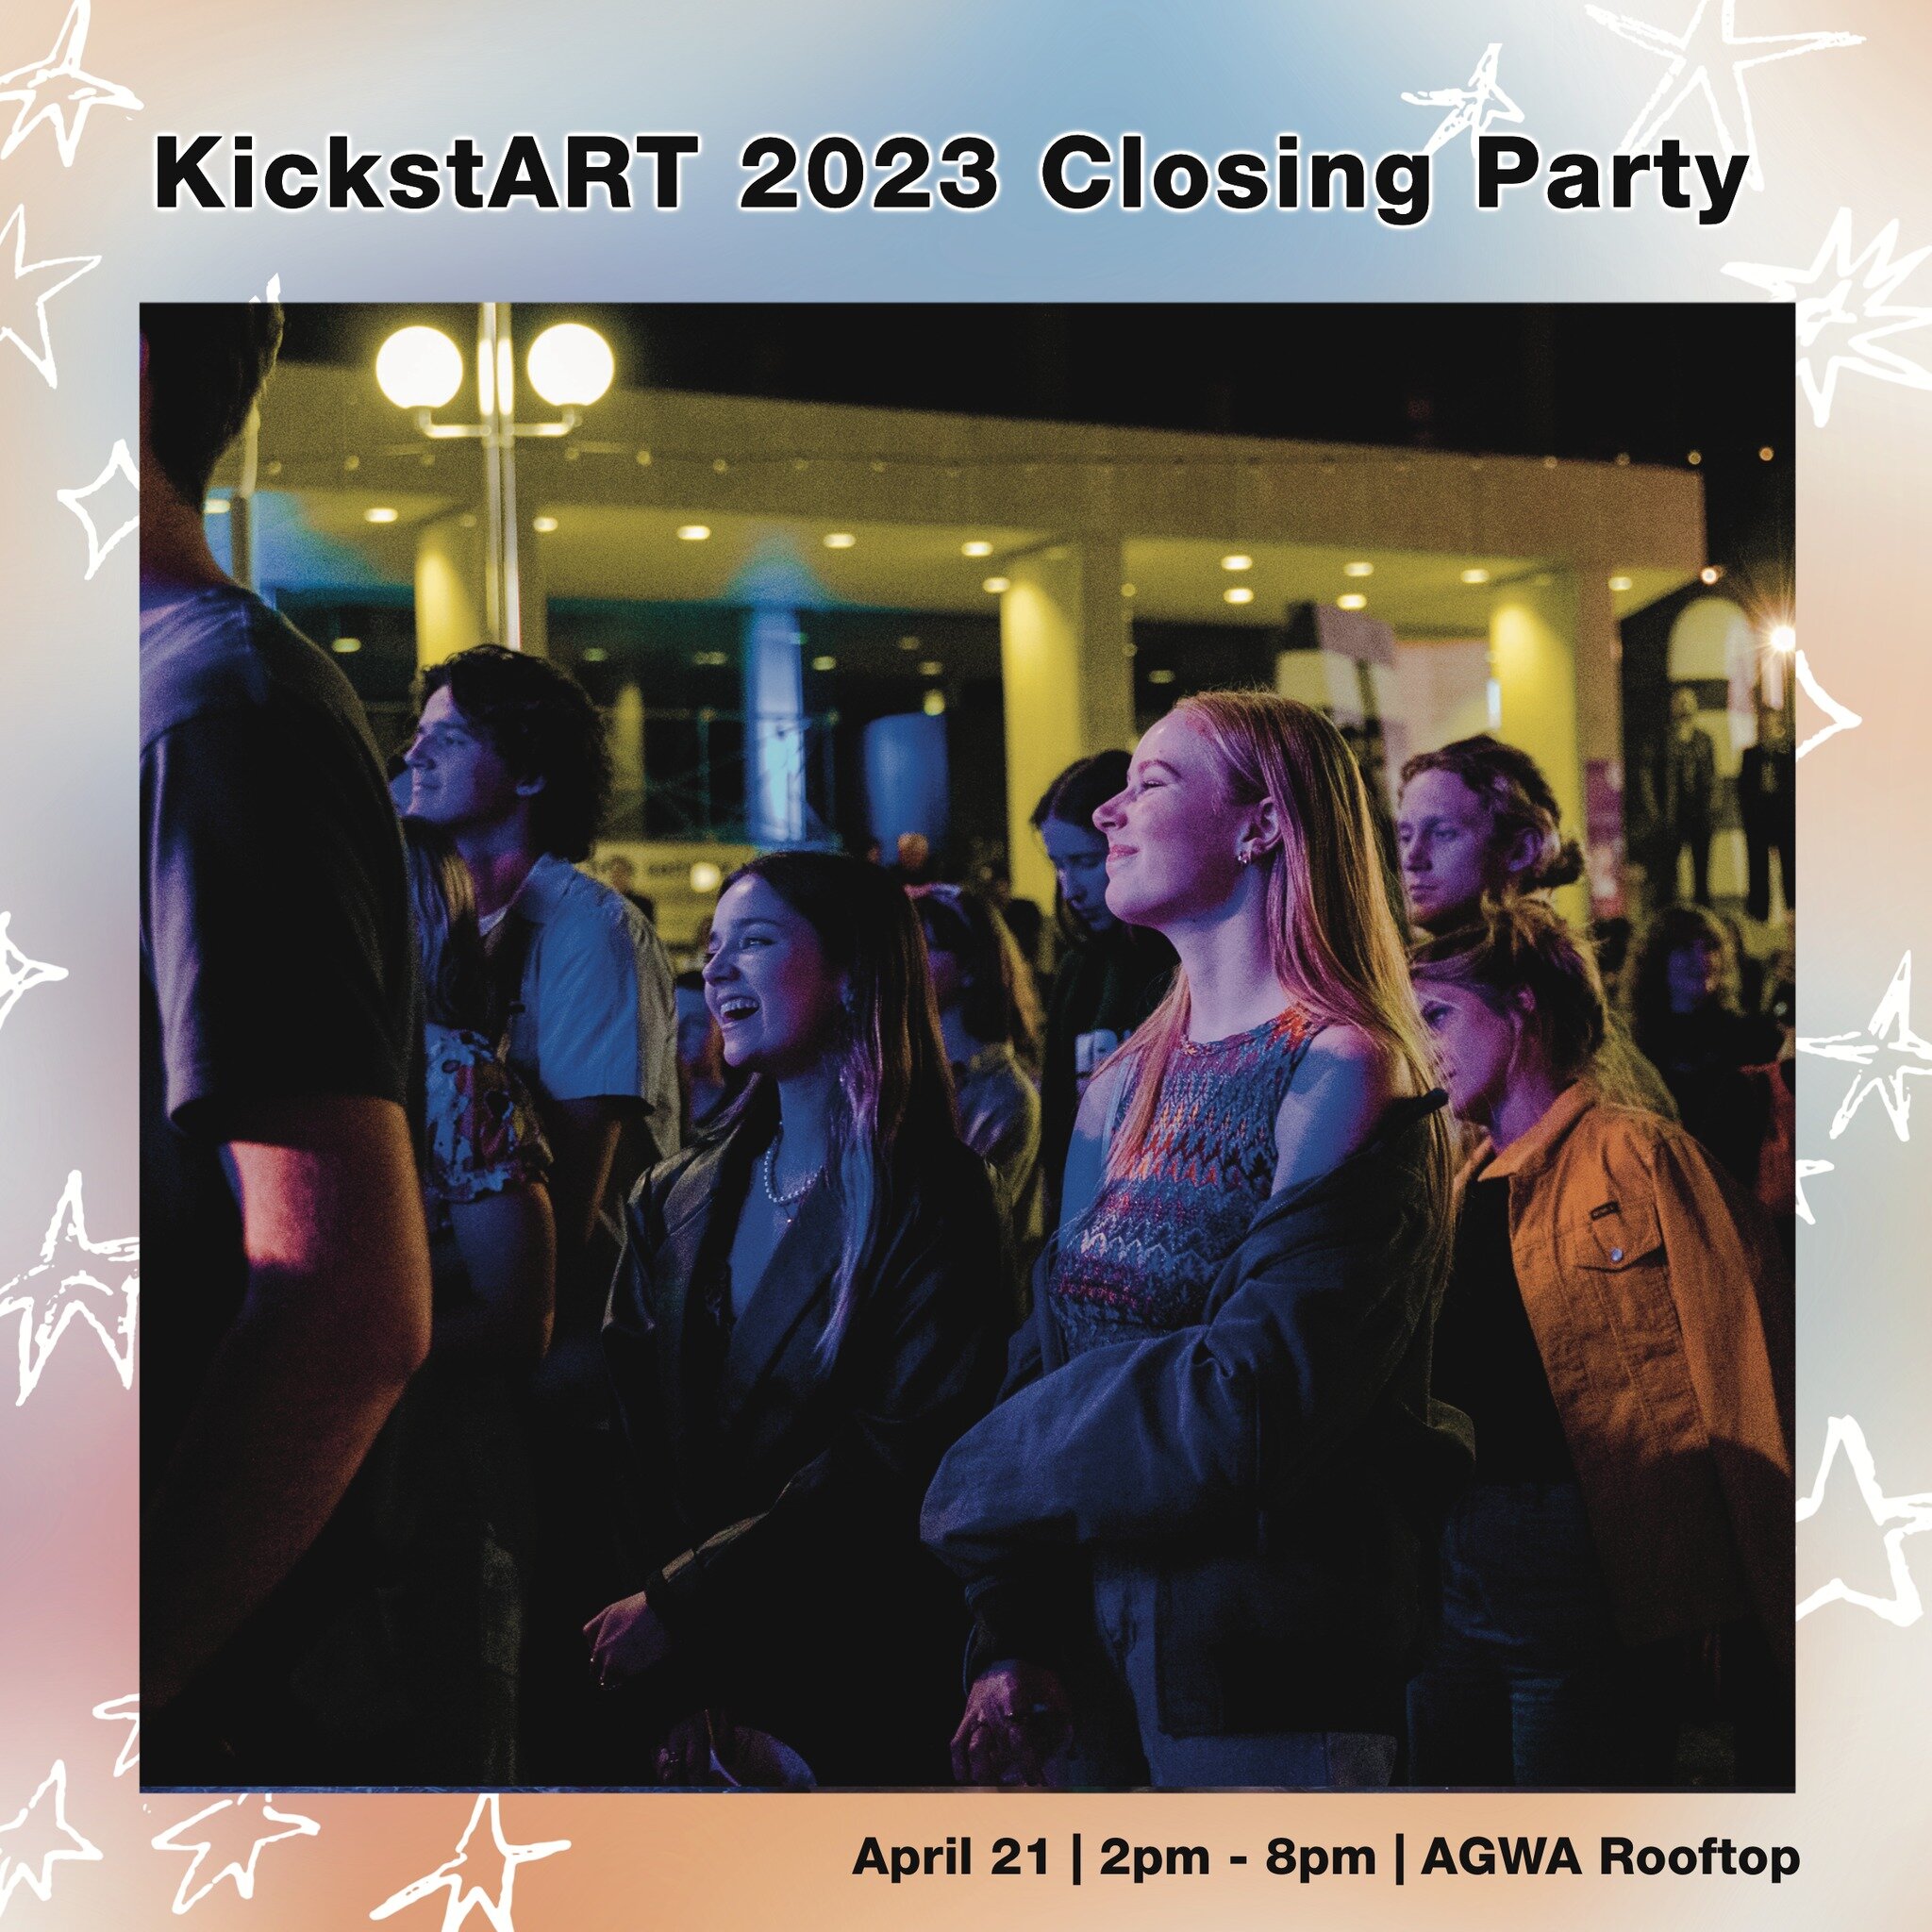 KickstART 2023 Closing Party 🎉🎊

Youth Week WA KickstART Festival 2023 finishes off with an evening of free live music, dancing and games at the Art Gallery of WA Rooftop on Friday April 21! Headlining will be Anesu, known for their catchy &amp; po